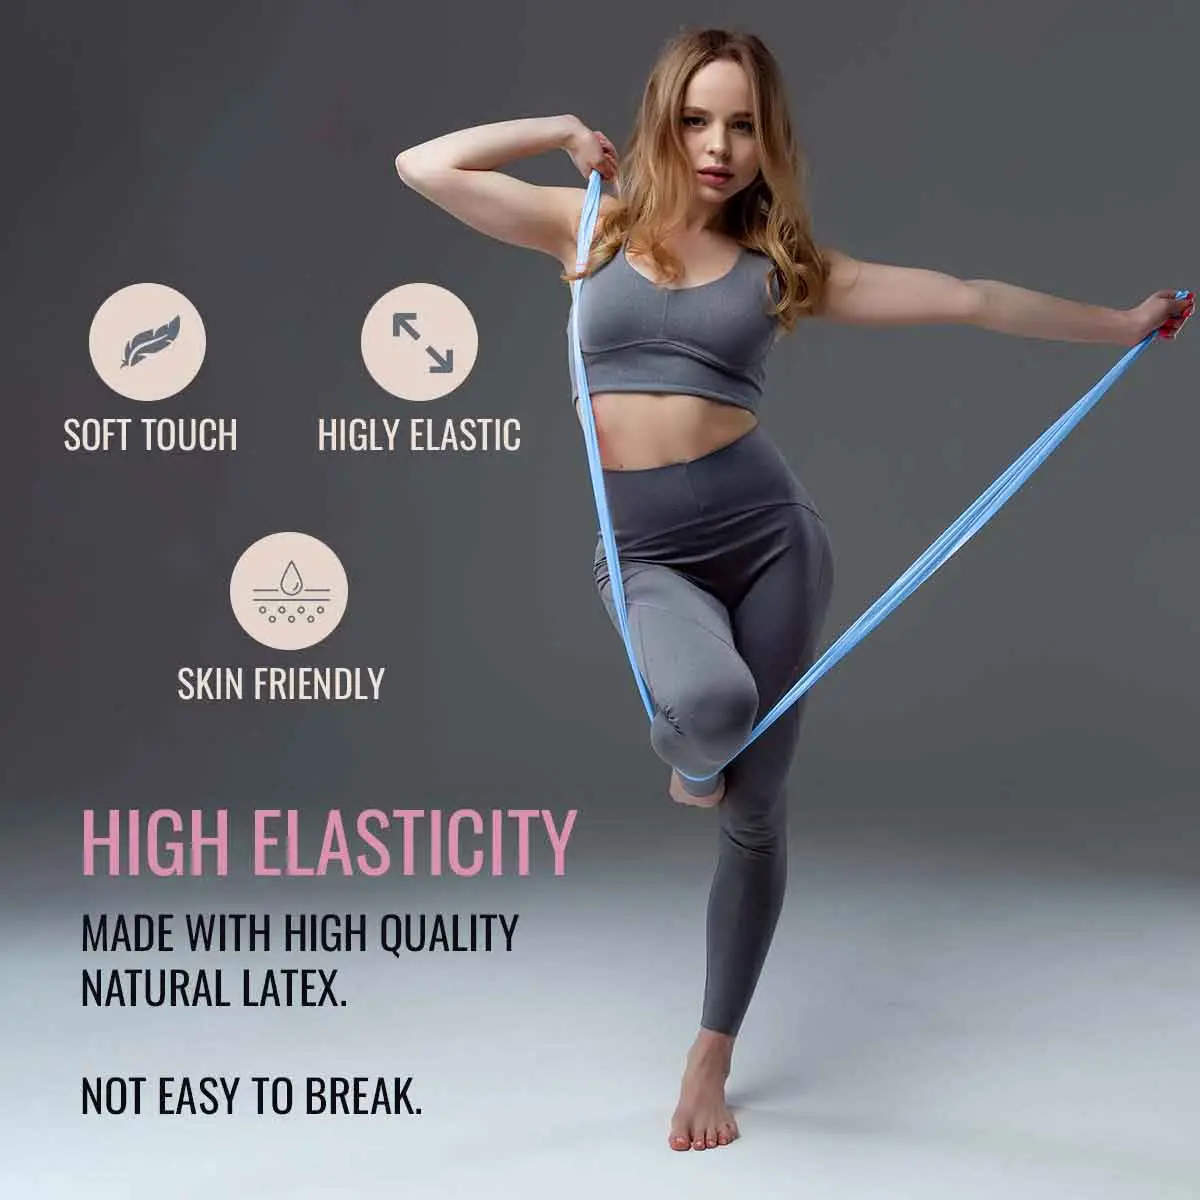 Durafit Resistance band Orlb4 with High Elasticity